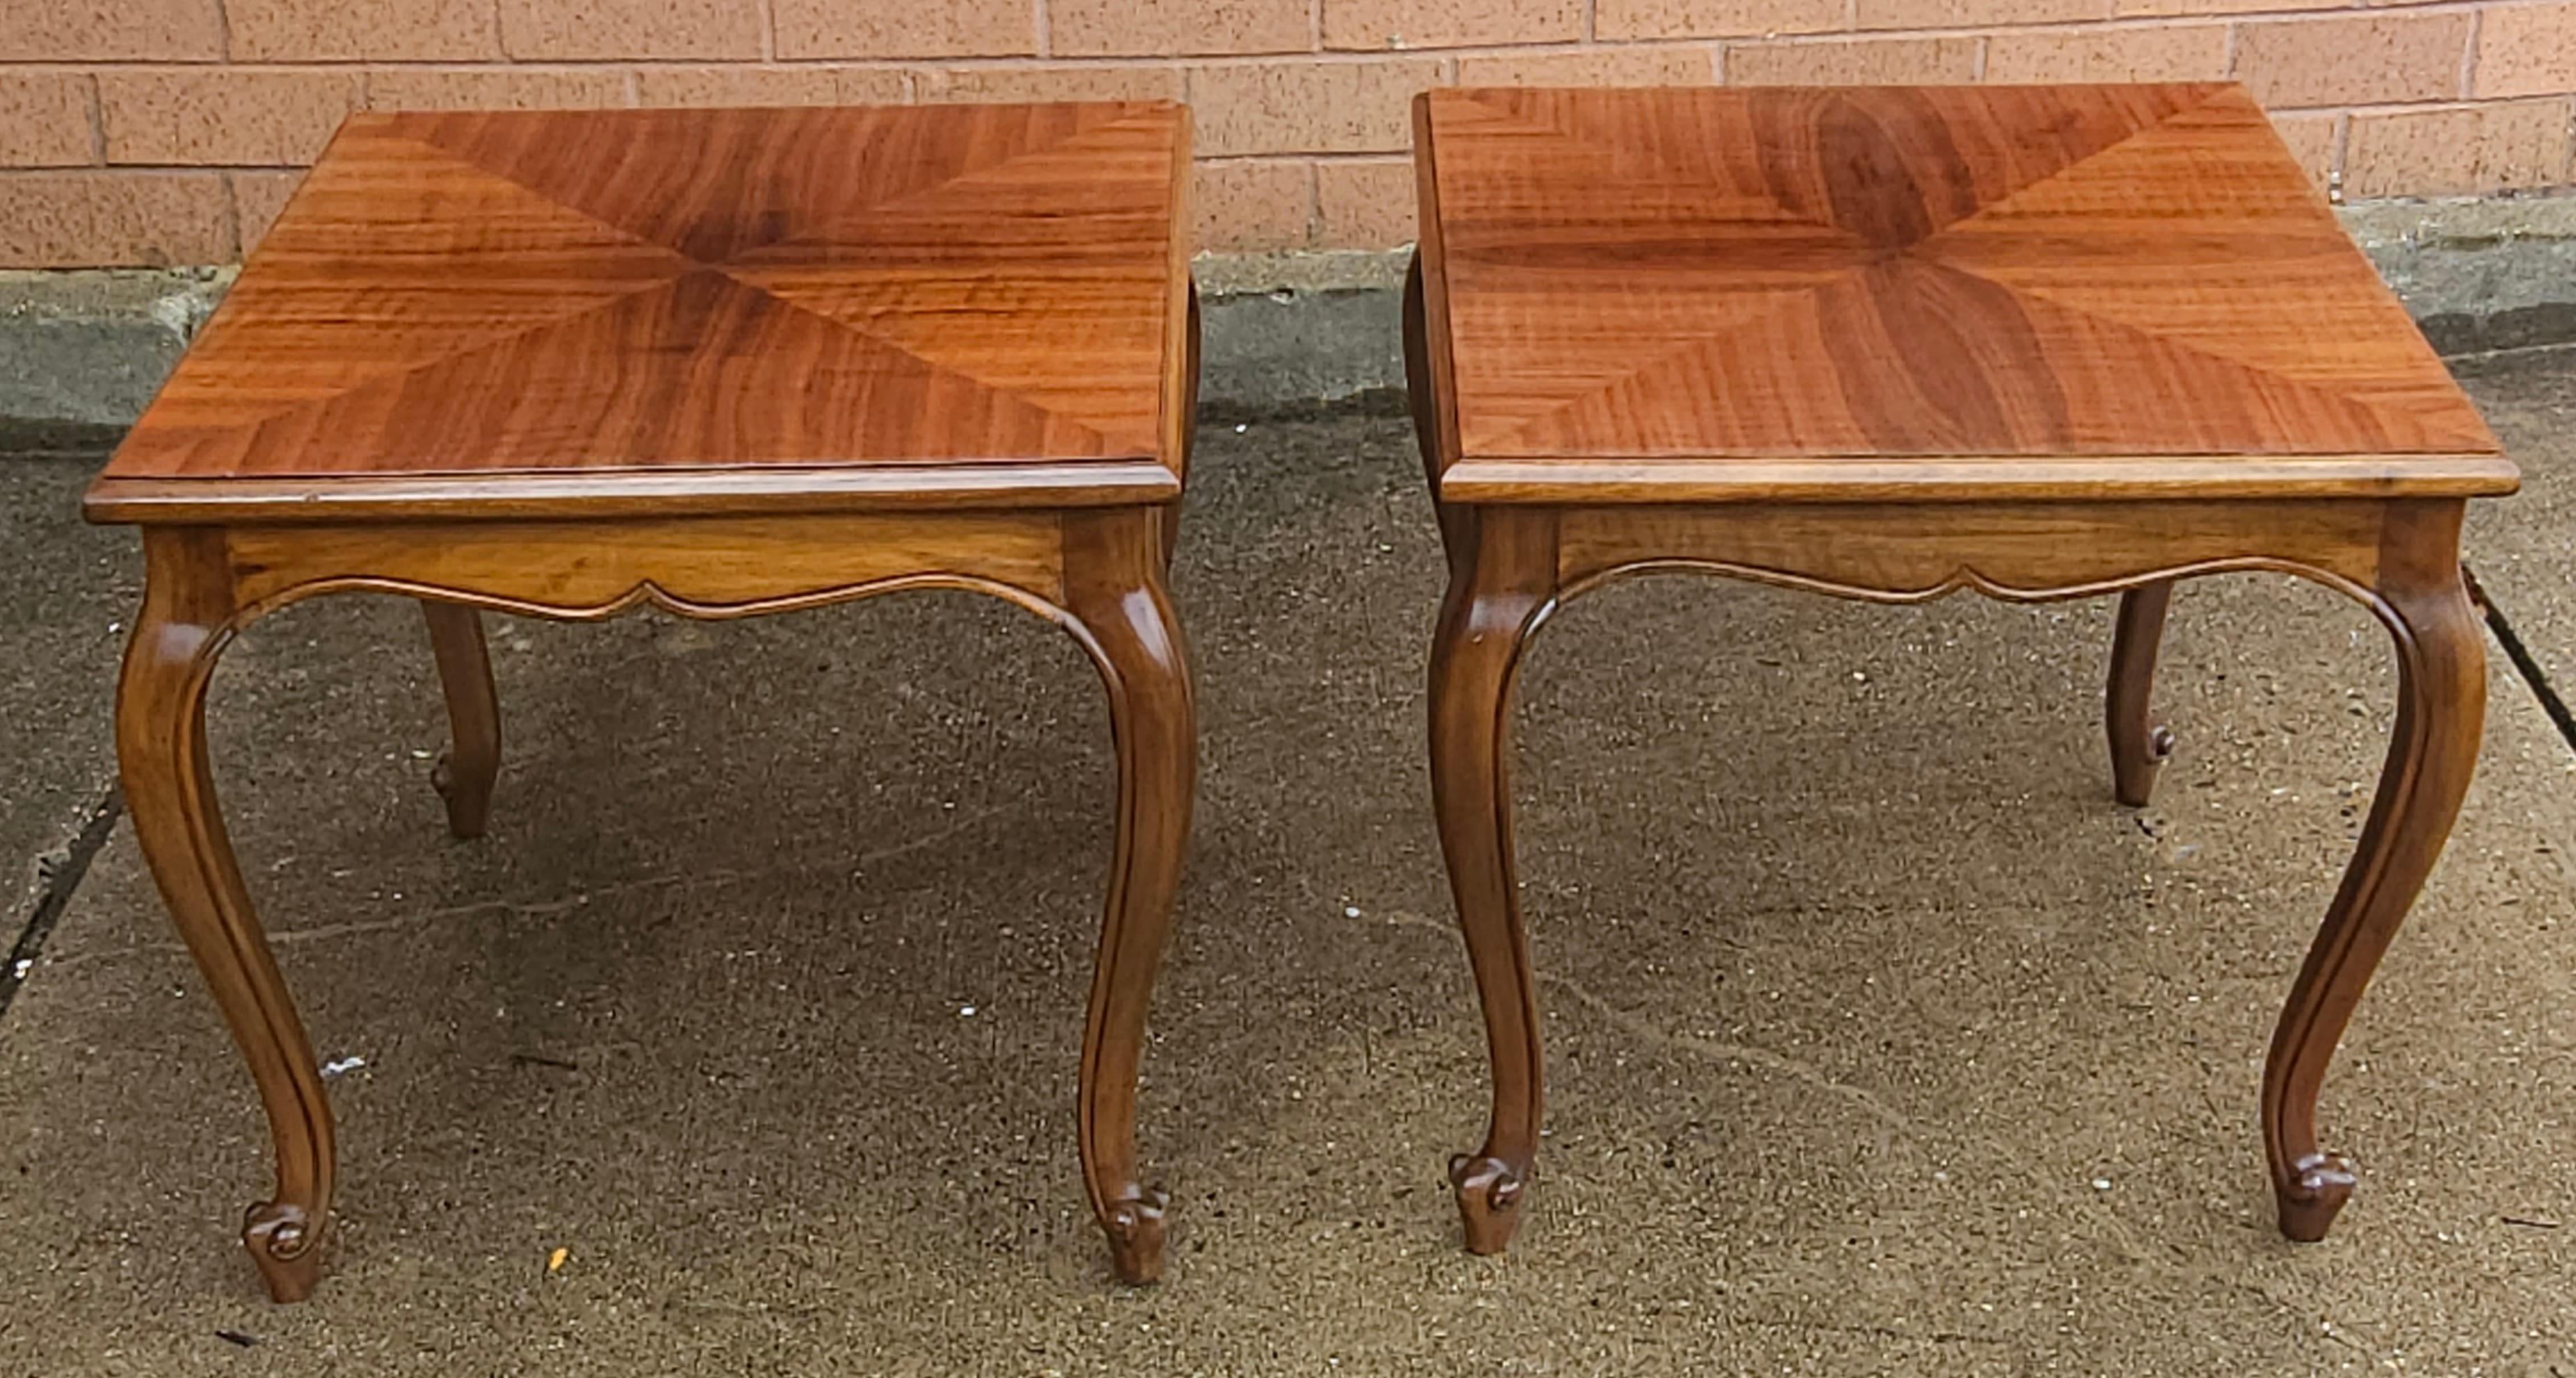 A very fine pair of handcrafted Brazilian Rosewood side tables in the Provincial style. Brazilian Rosewood is one of the rarest, most sought after Rosewoods in the World. Brazilian Rosewood is renowned for its colorfully patterned grain. Brazilian